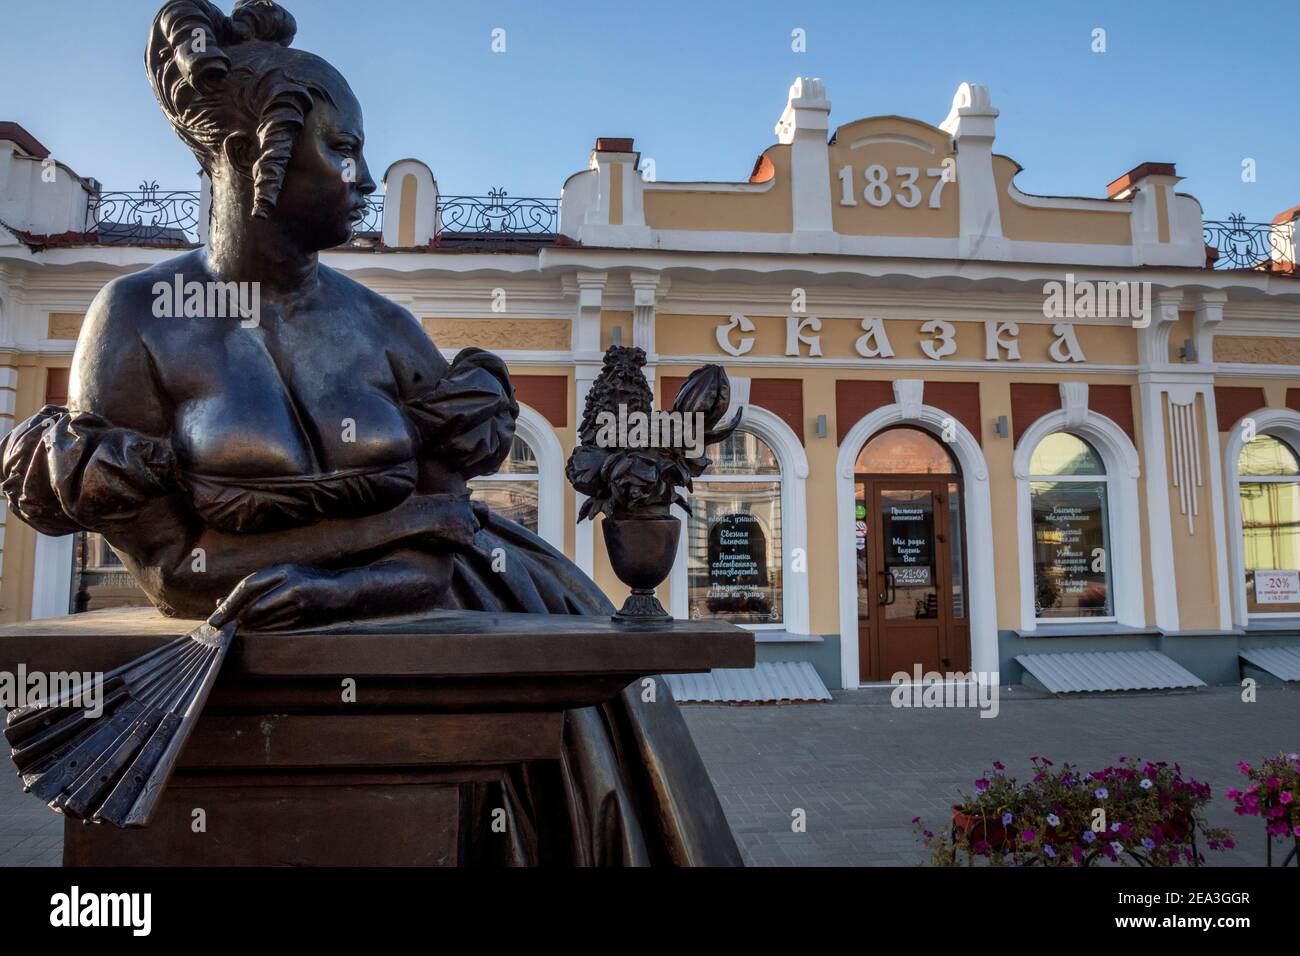 Tambov, Russia. 24th of August, 2018 View of bronze sculpture to the The Tambov Treasurer's Wife (the heroine of the poem by Mikhail Lermontov) by the Moscow sculptor Alexander Mironov at the cafe 'Skazka' (on the background) on Kommunalnaya Street in Tambov city, Russia Stock Photo